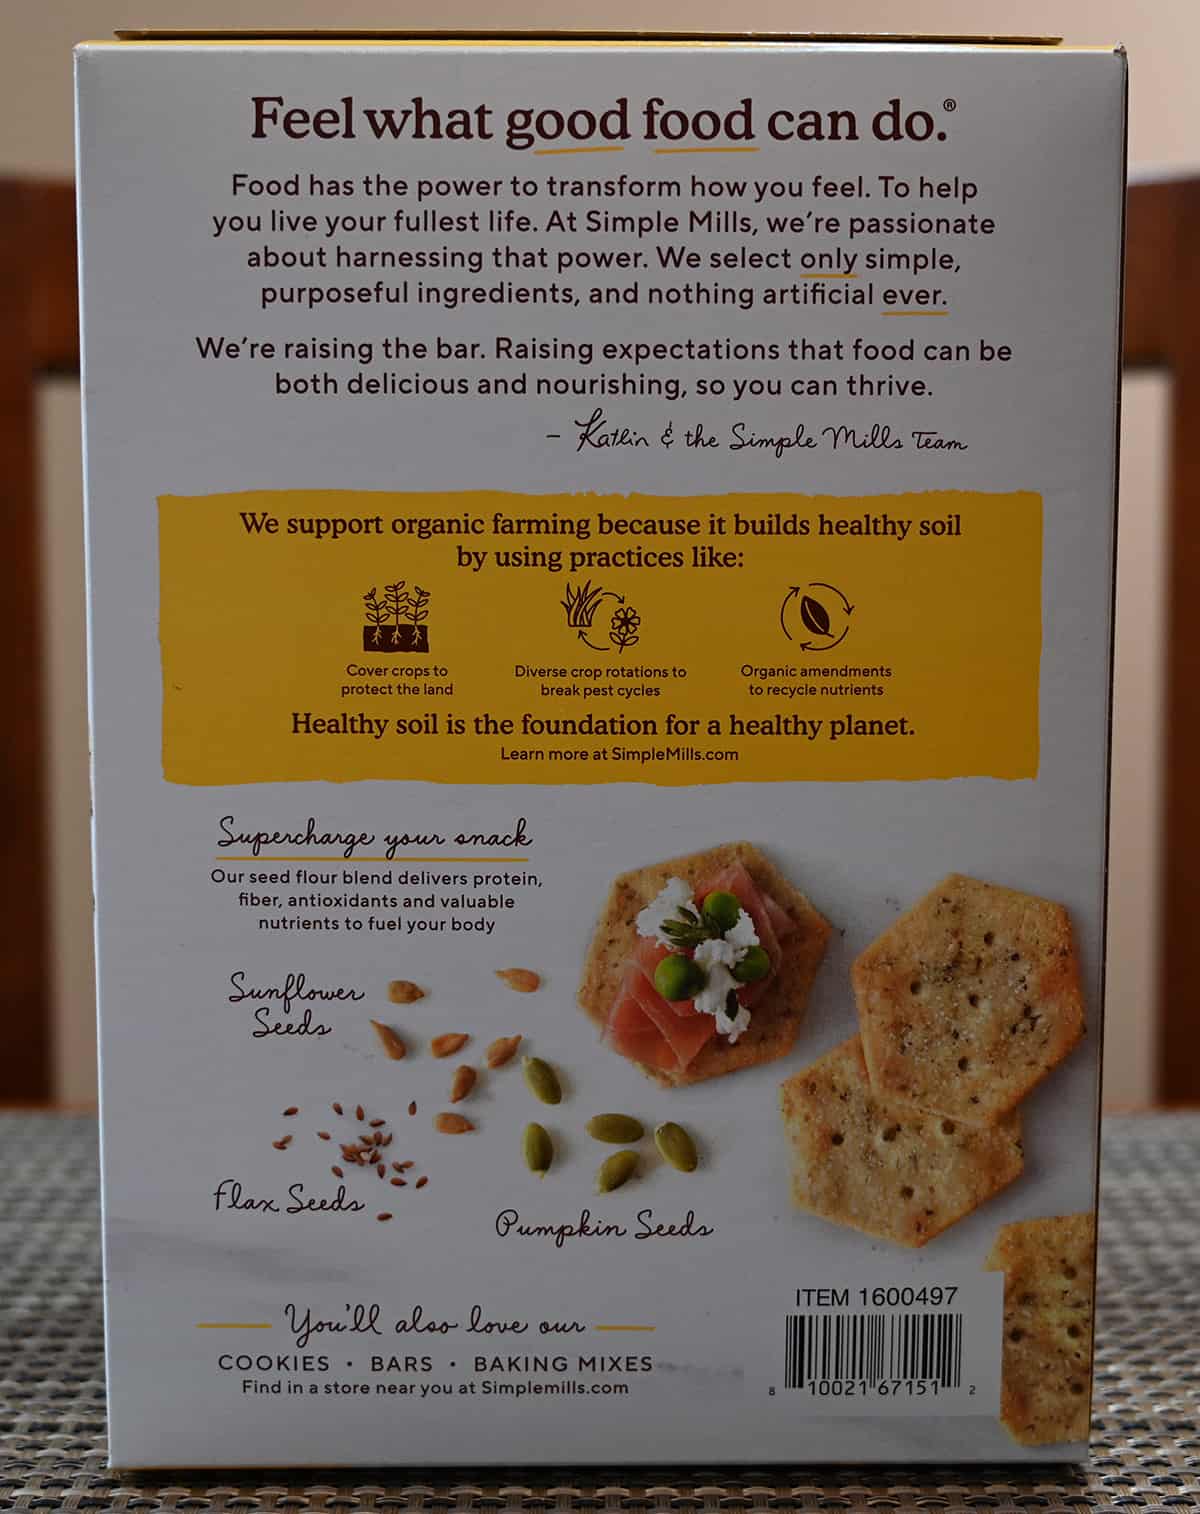 Image of the back of the box of crackers showing product description and company description.